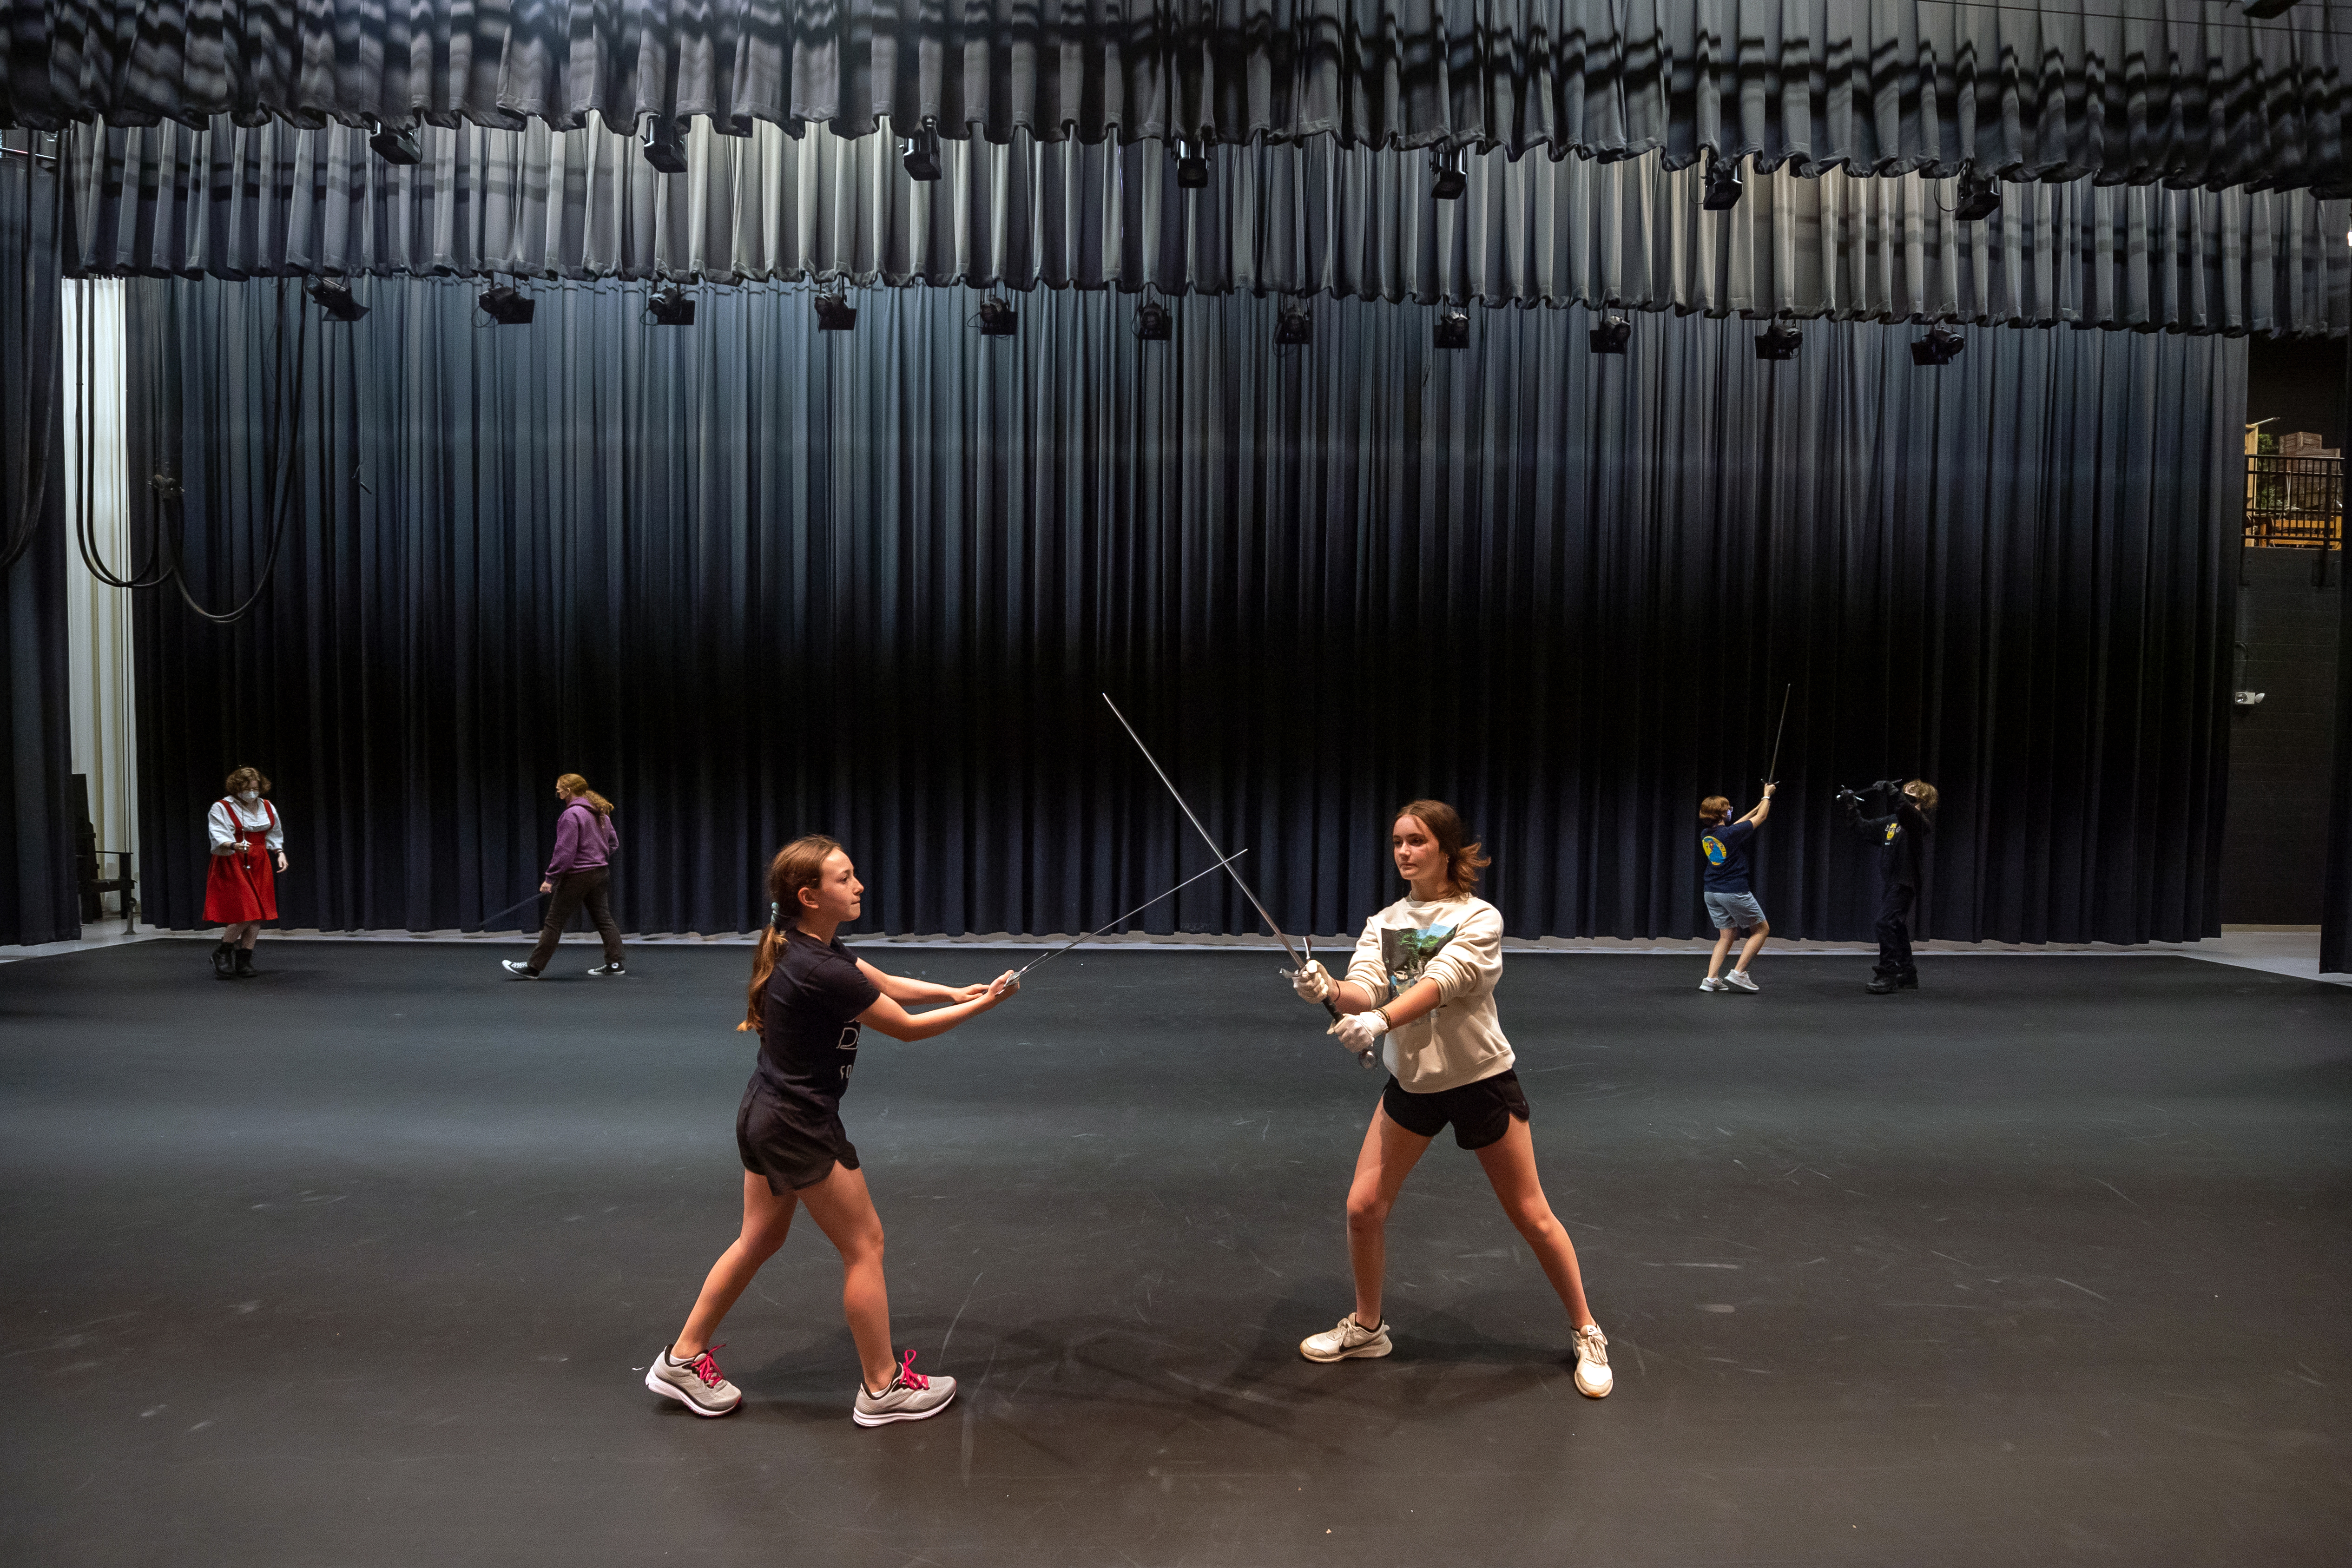 Students practice a choreographed sword fight routine during a "Stage Combat" course through an FCPS summer program.